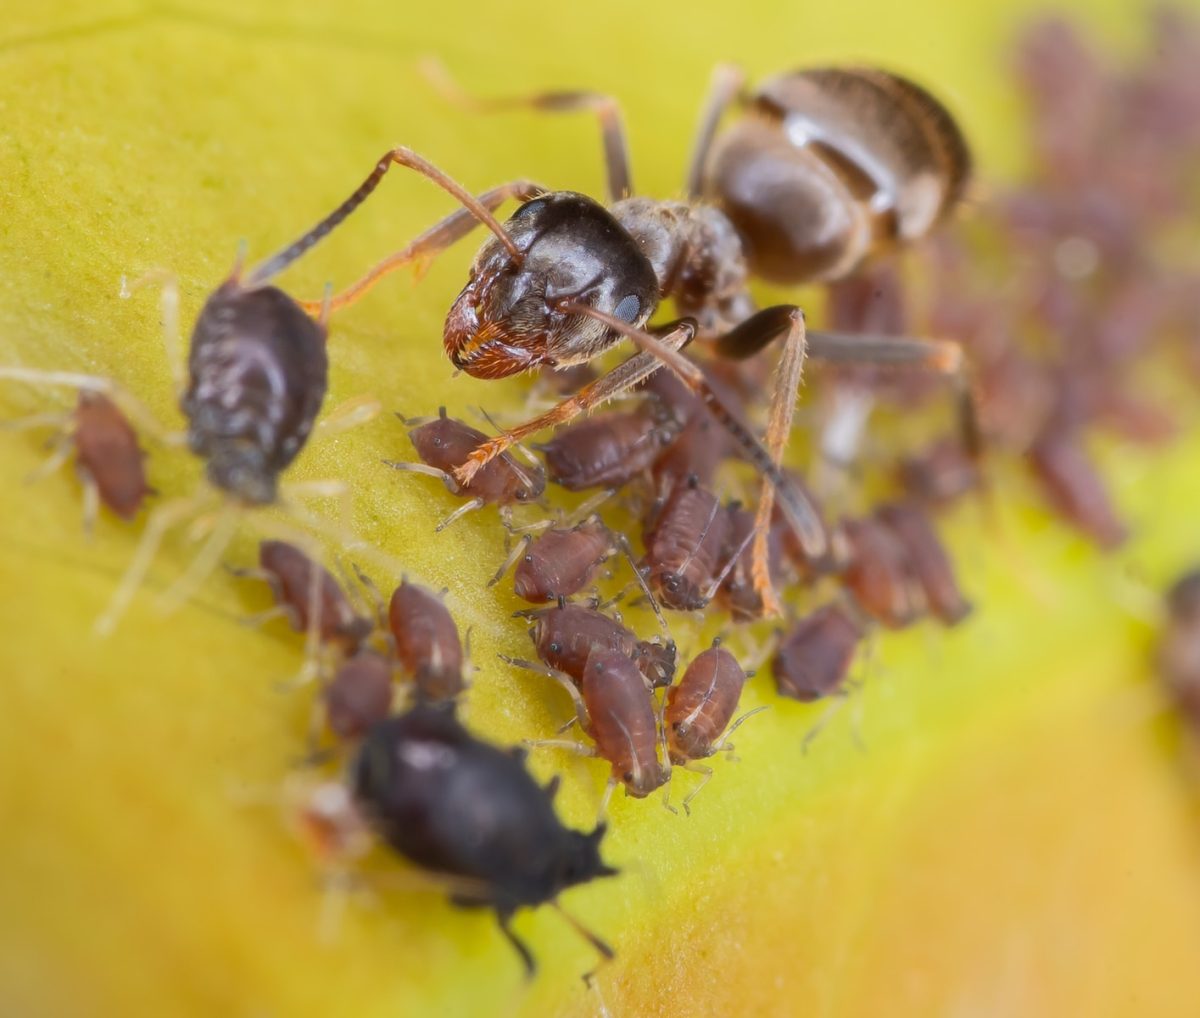 a close up of a group of bugs on a banana